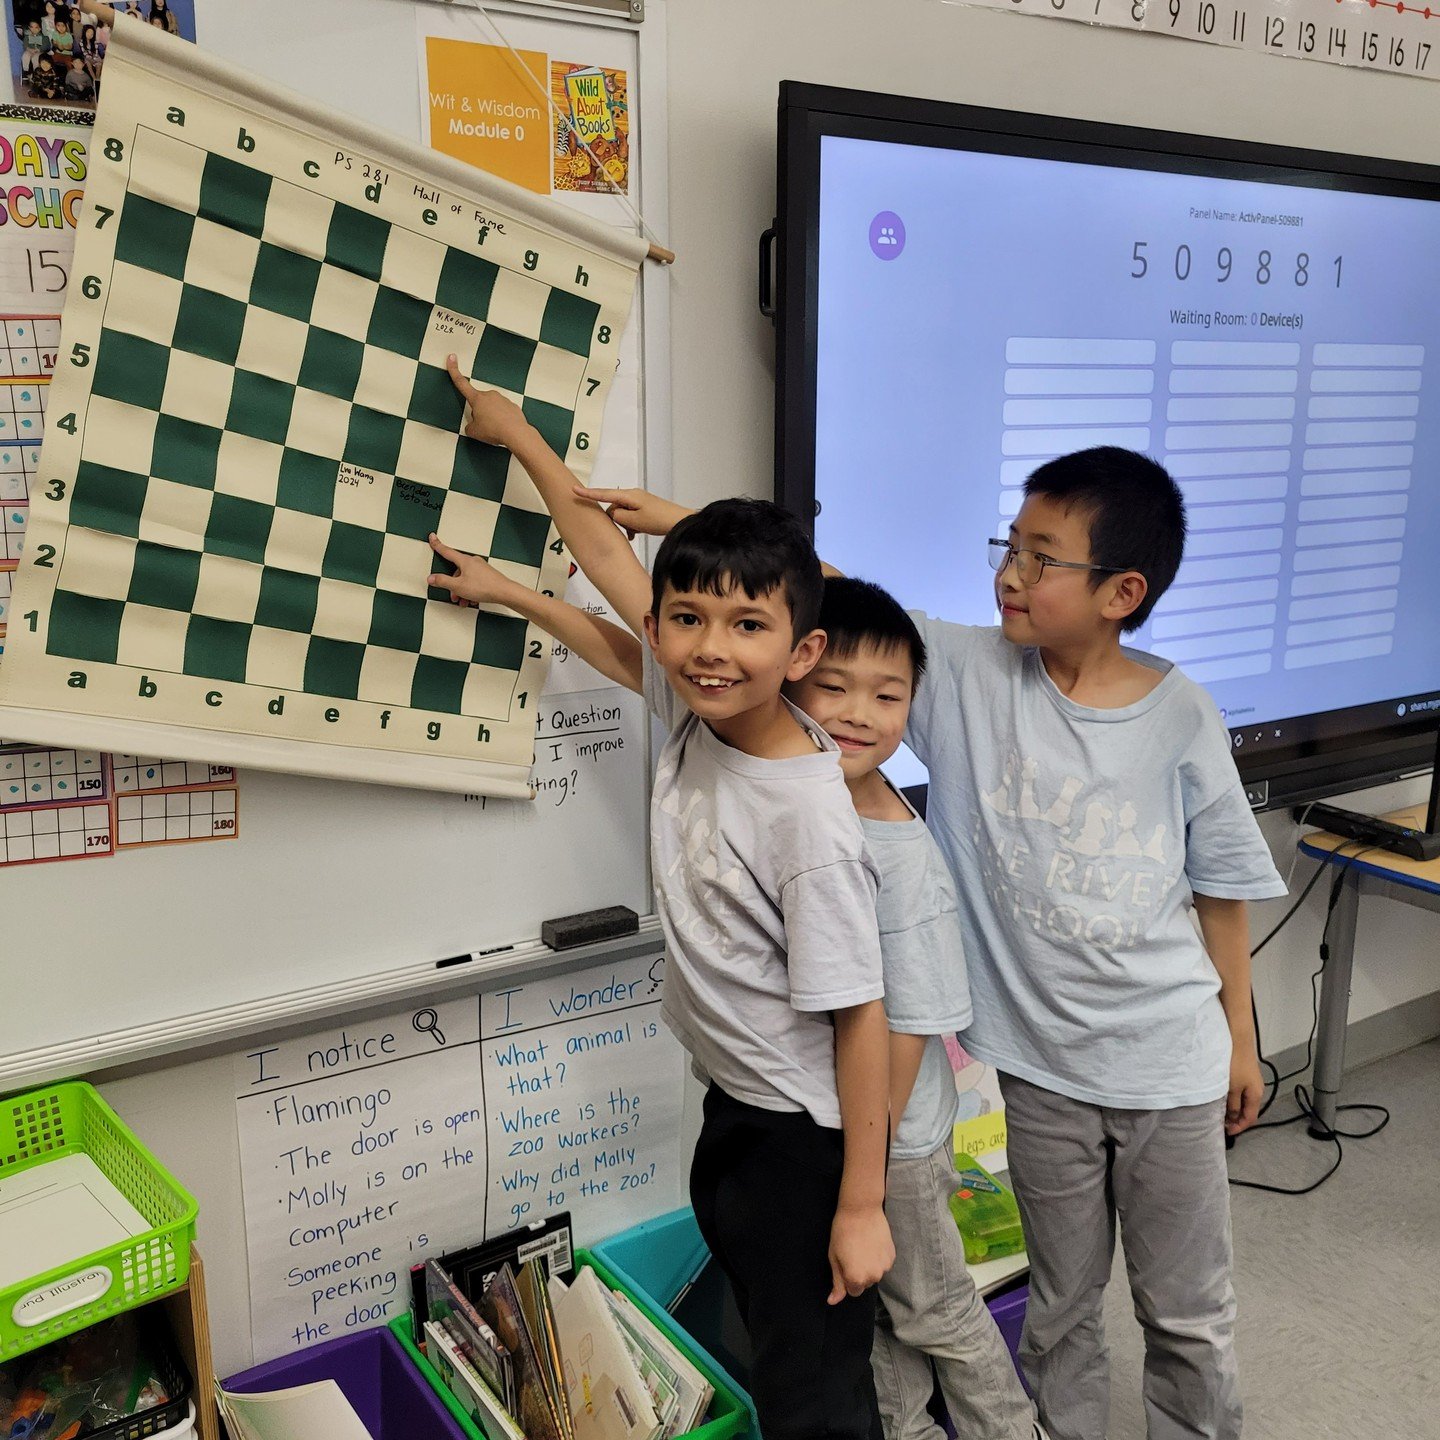 Brendan and Lve both broke 1000 at the Manhattan Cup the other week, and now join Niko as the second and third Hall of Famers at PS 281! Go Sharks!! 🦈🦈 #1000plususcf #halloffame @ps281_pta